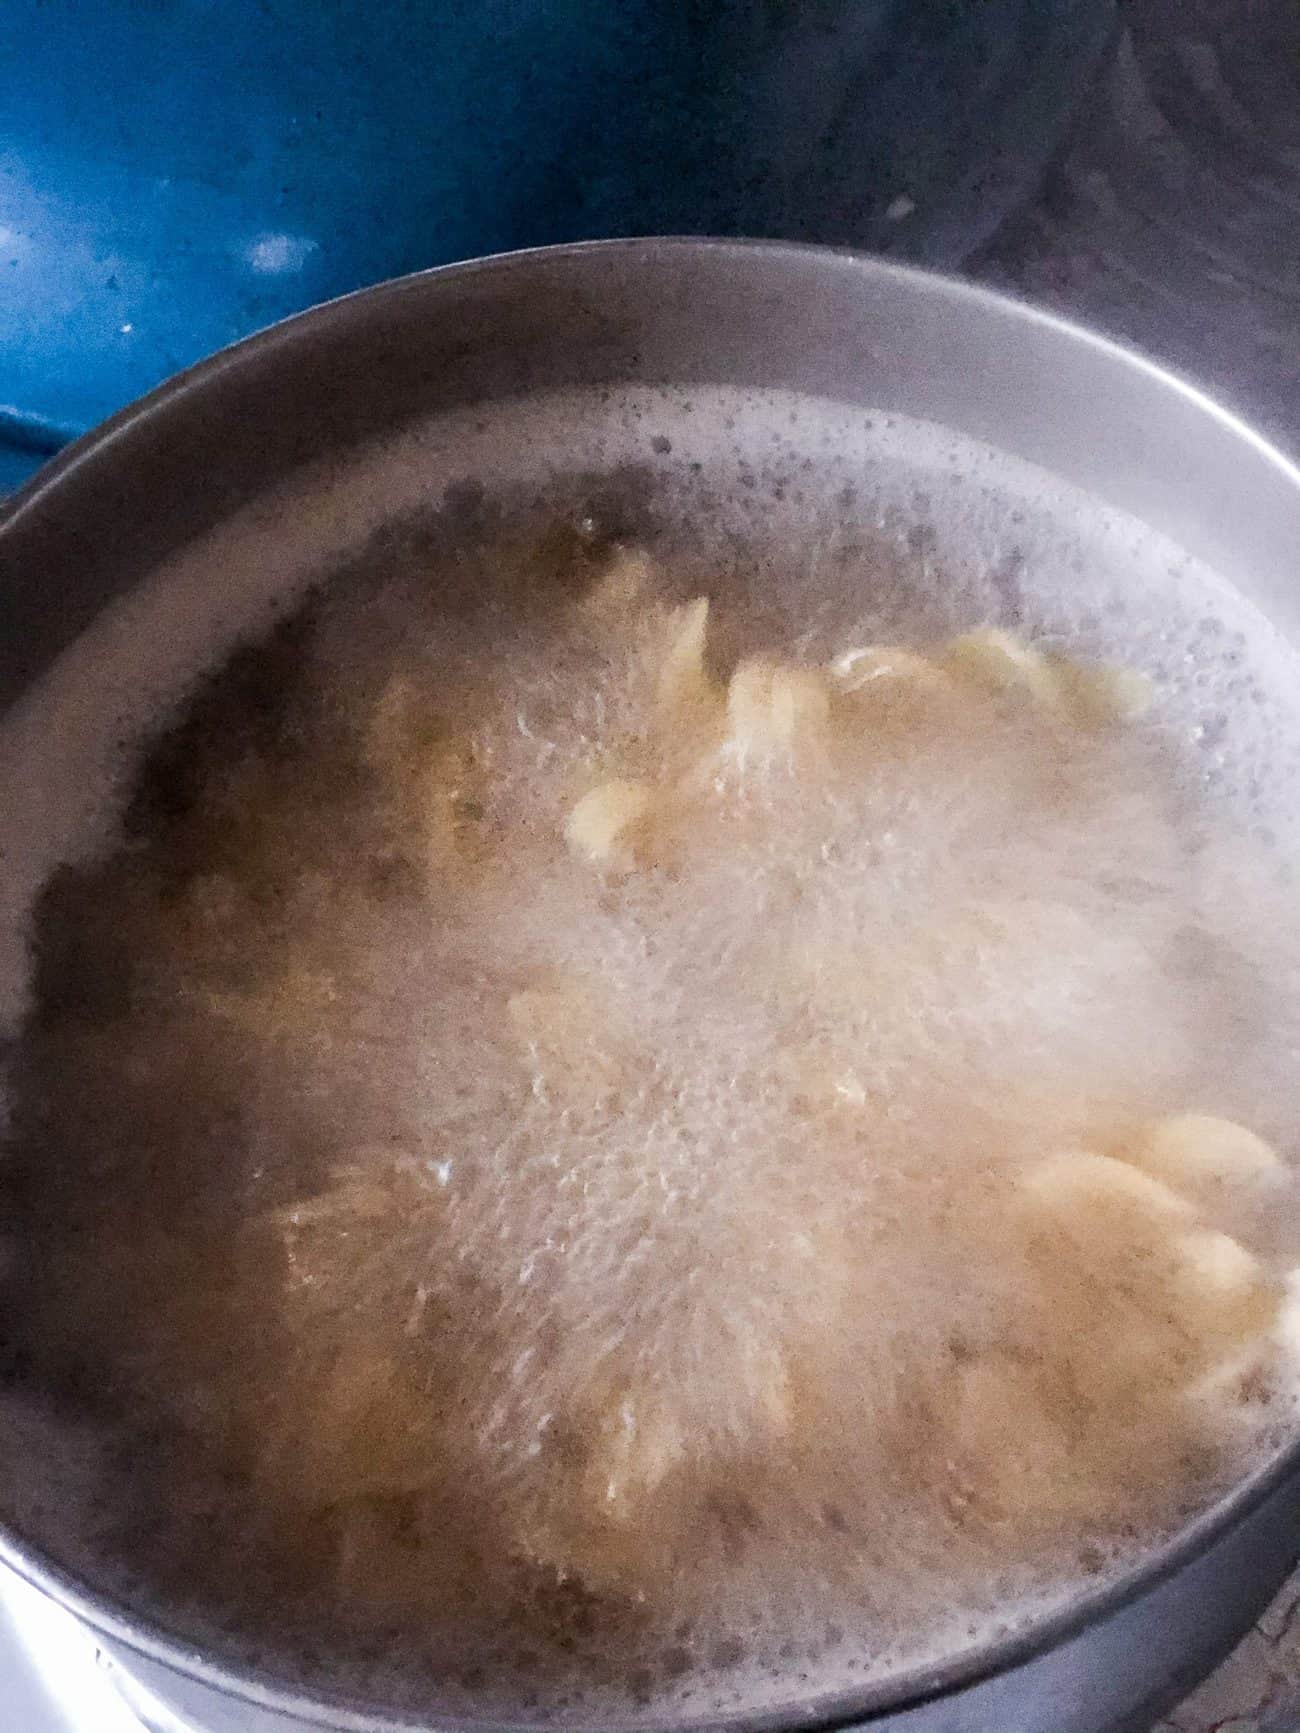 Wait for the water to boil and then add in the egg noodles.